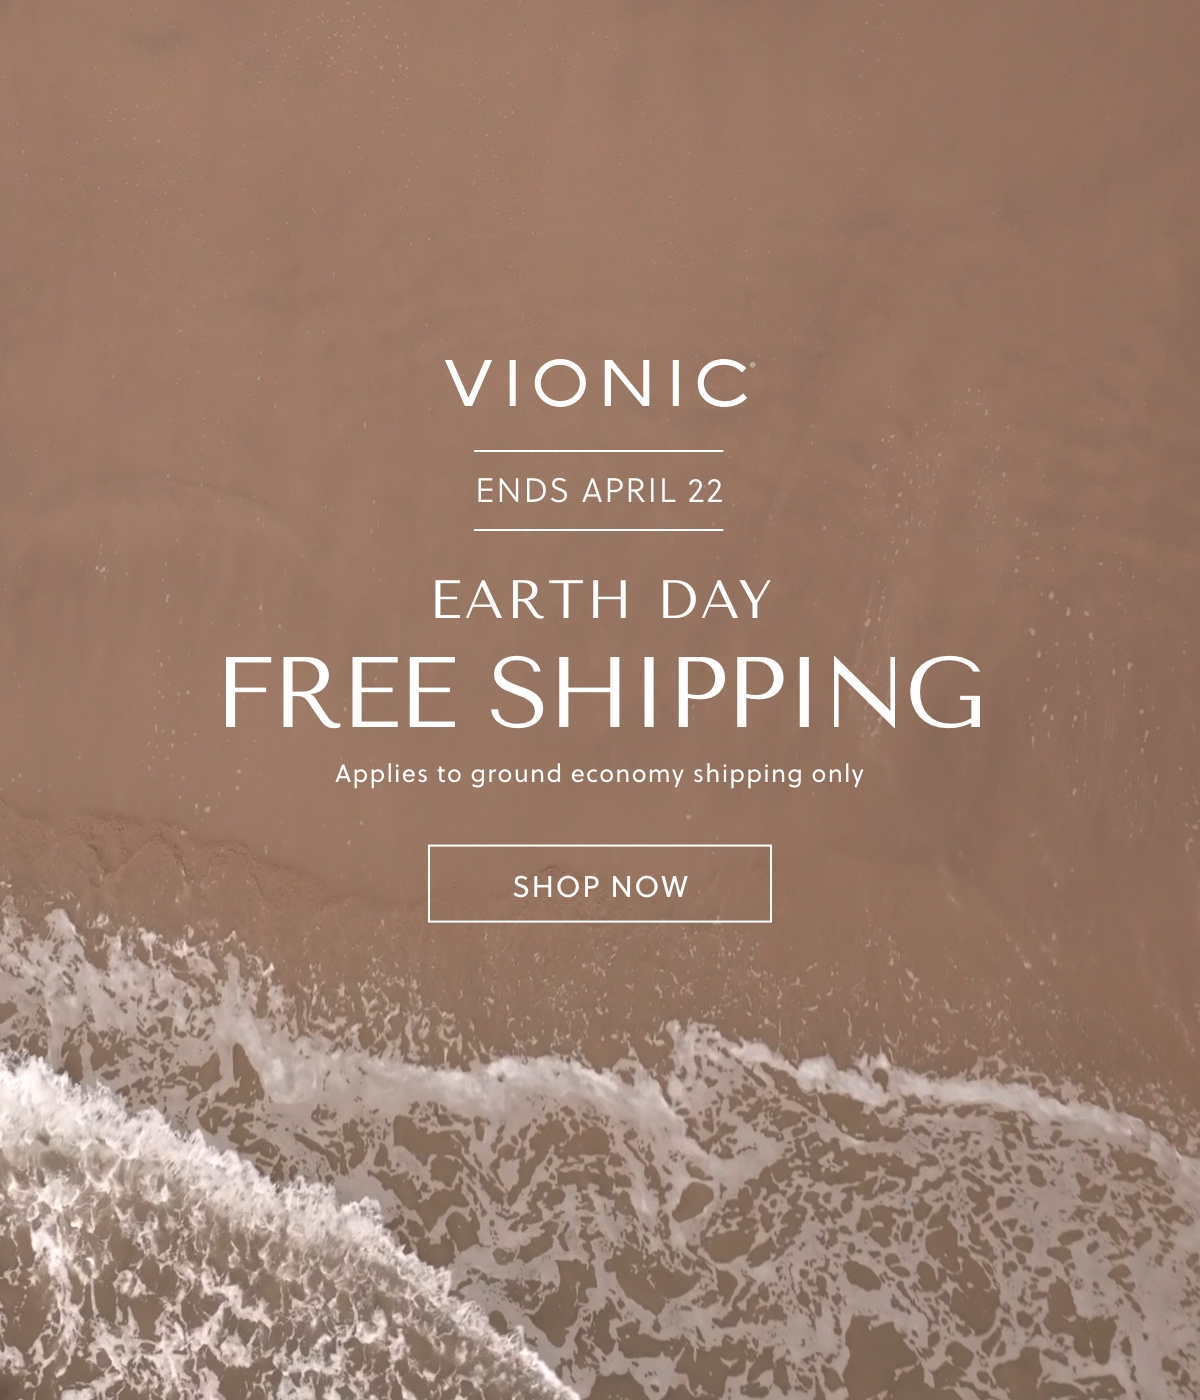 EARTH DAY FREE SHIPPING. Applies to ground economy shipping only. Shop Now